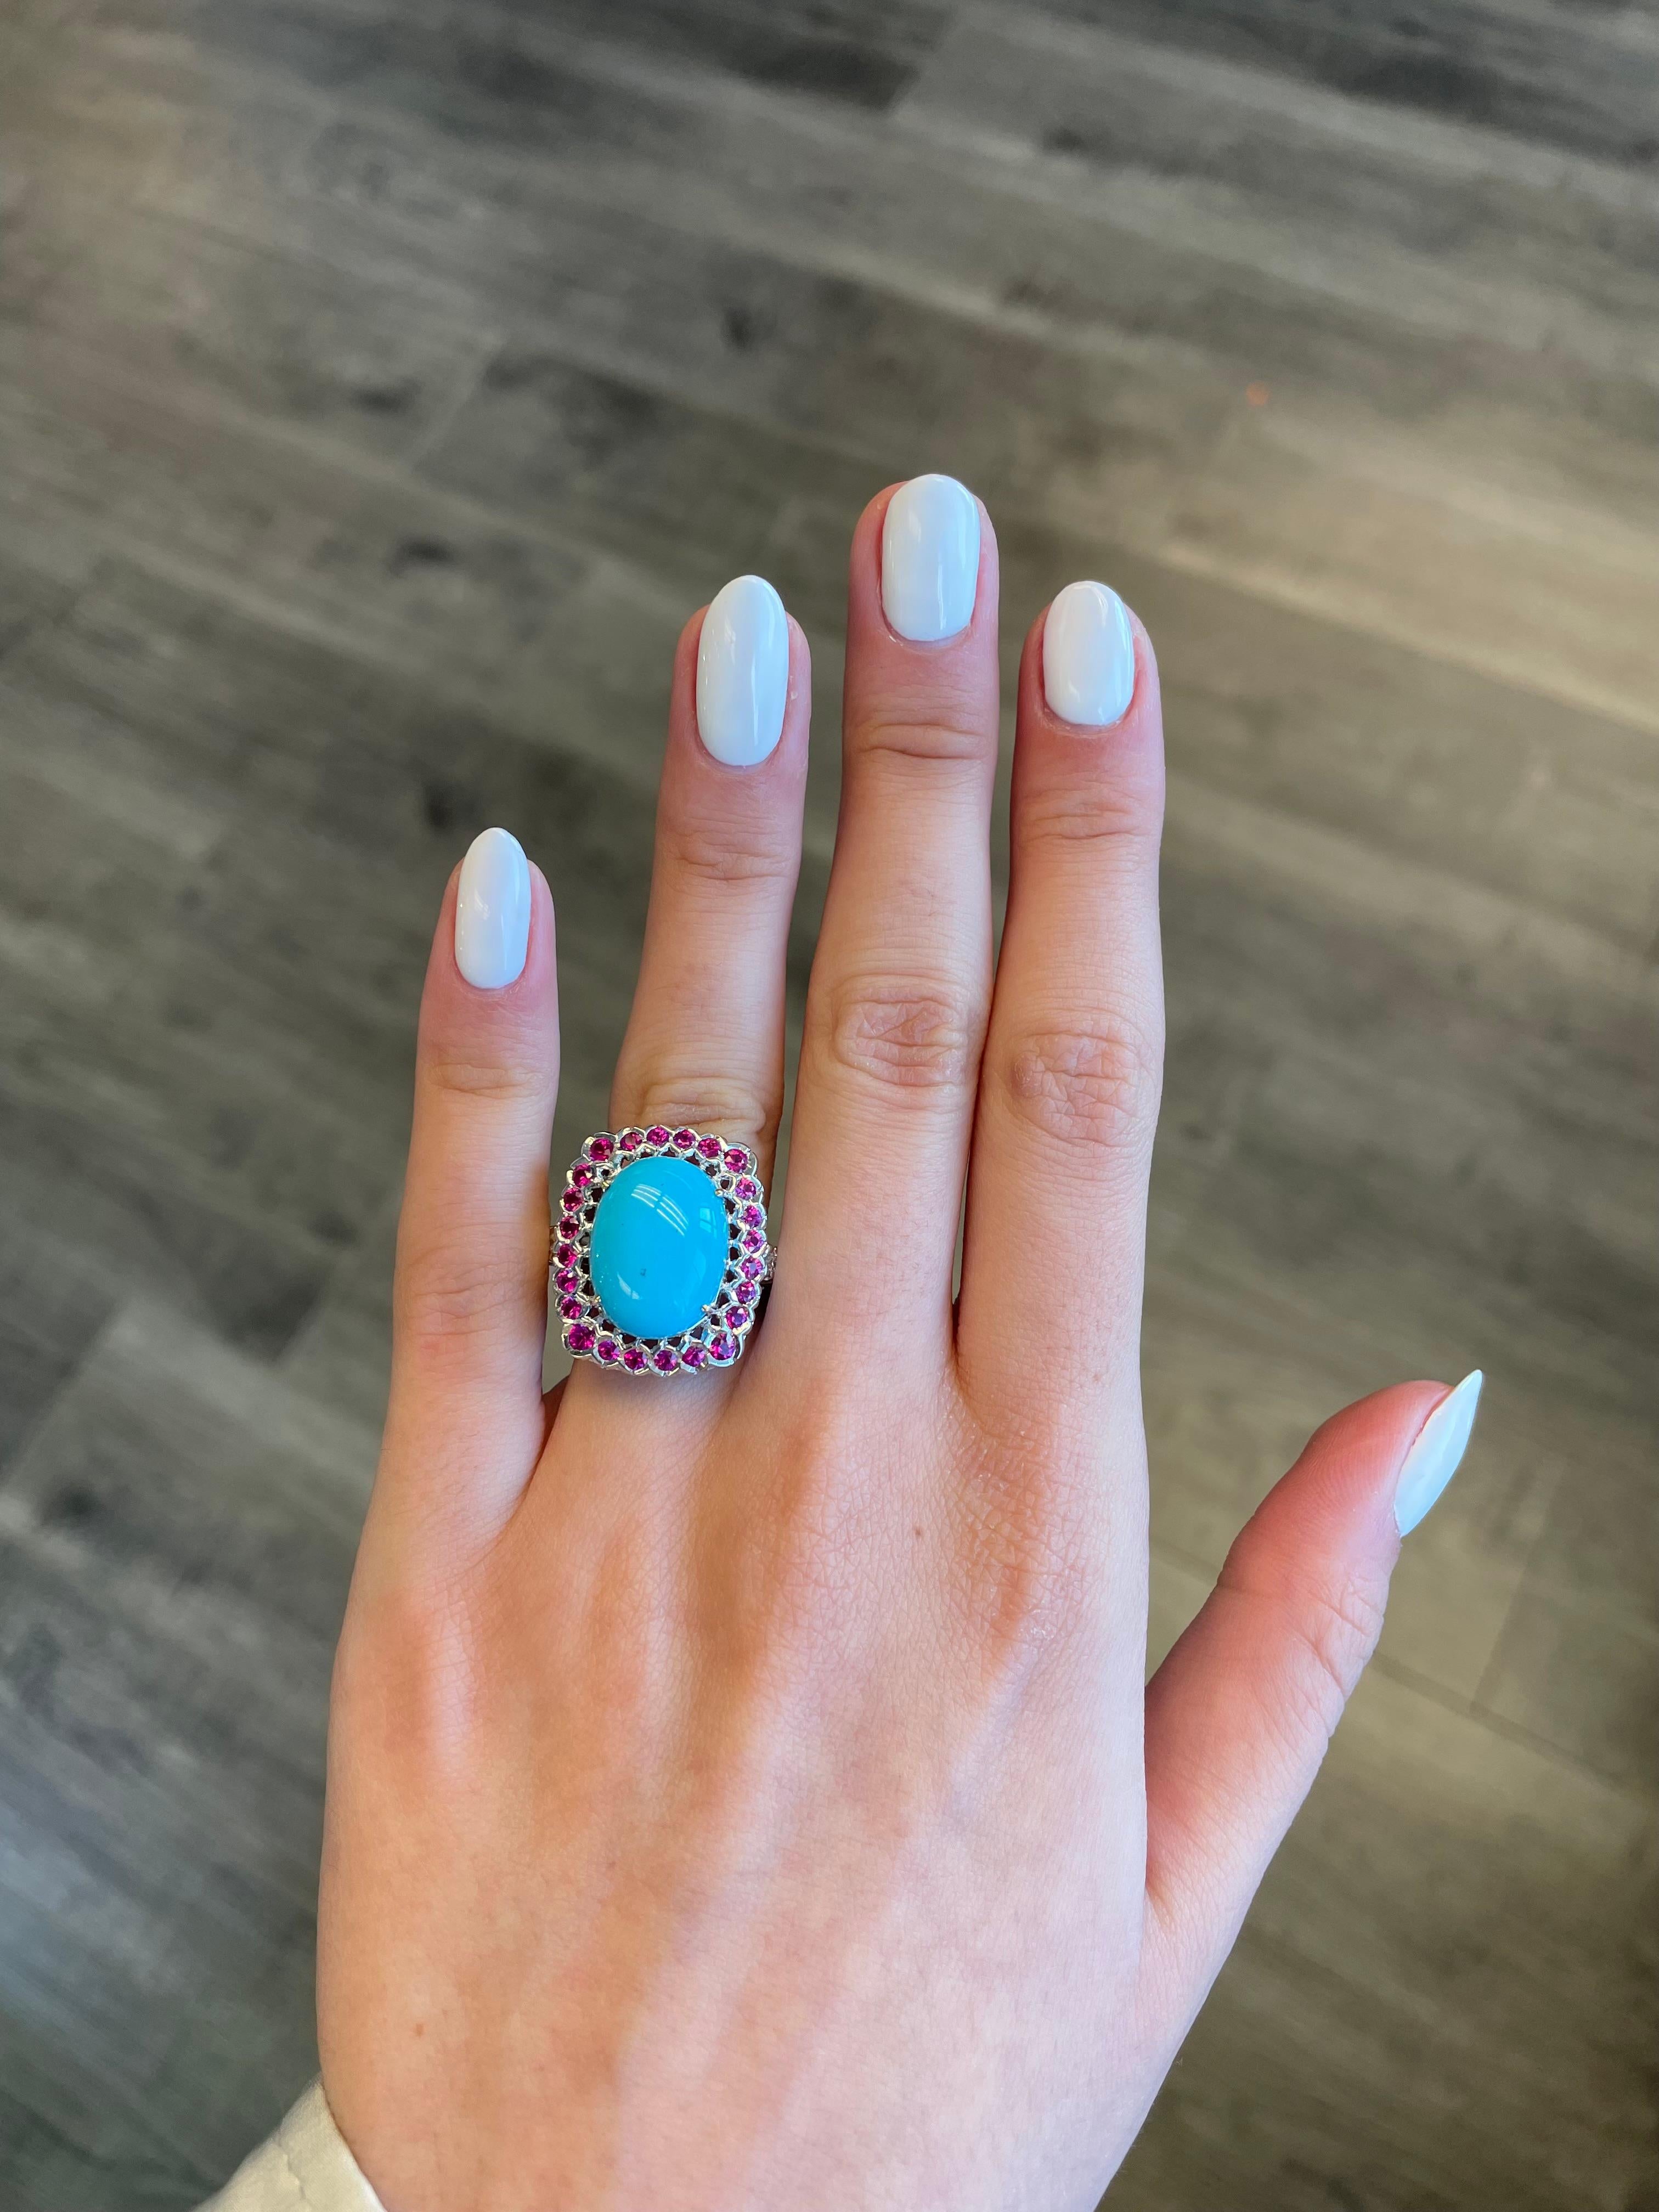 Exquisite and statement turquoise, ruby, and diamond ring. 
Center Arizona turquoise surrounded by 4.20ct of round rubies and 0.60ct of round brilliant diamonds. 4.80ct total gemstone weight set in 18-karat white gold with black rhodium.